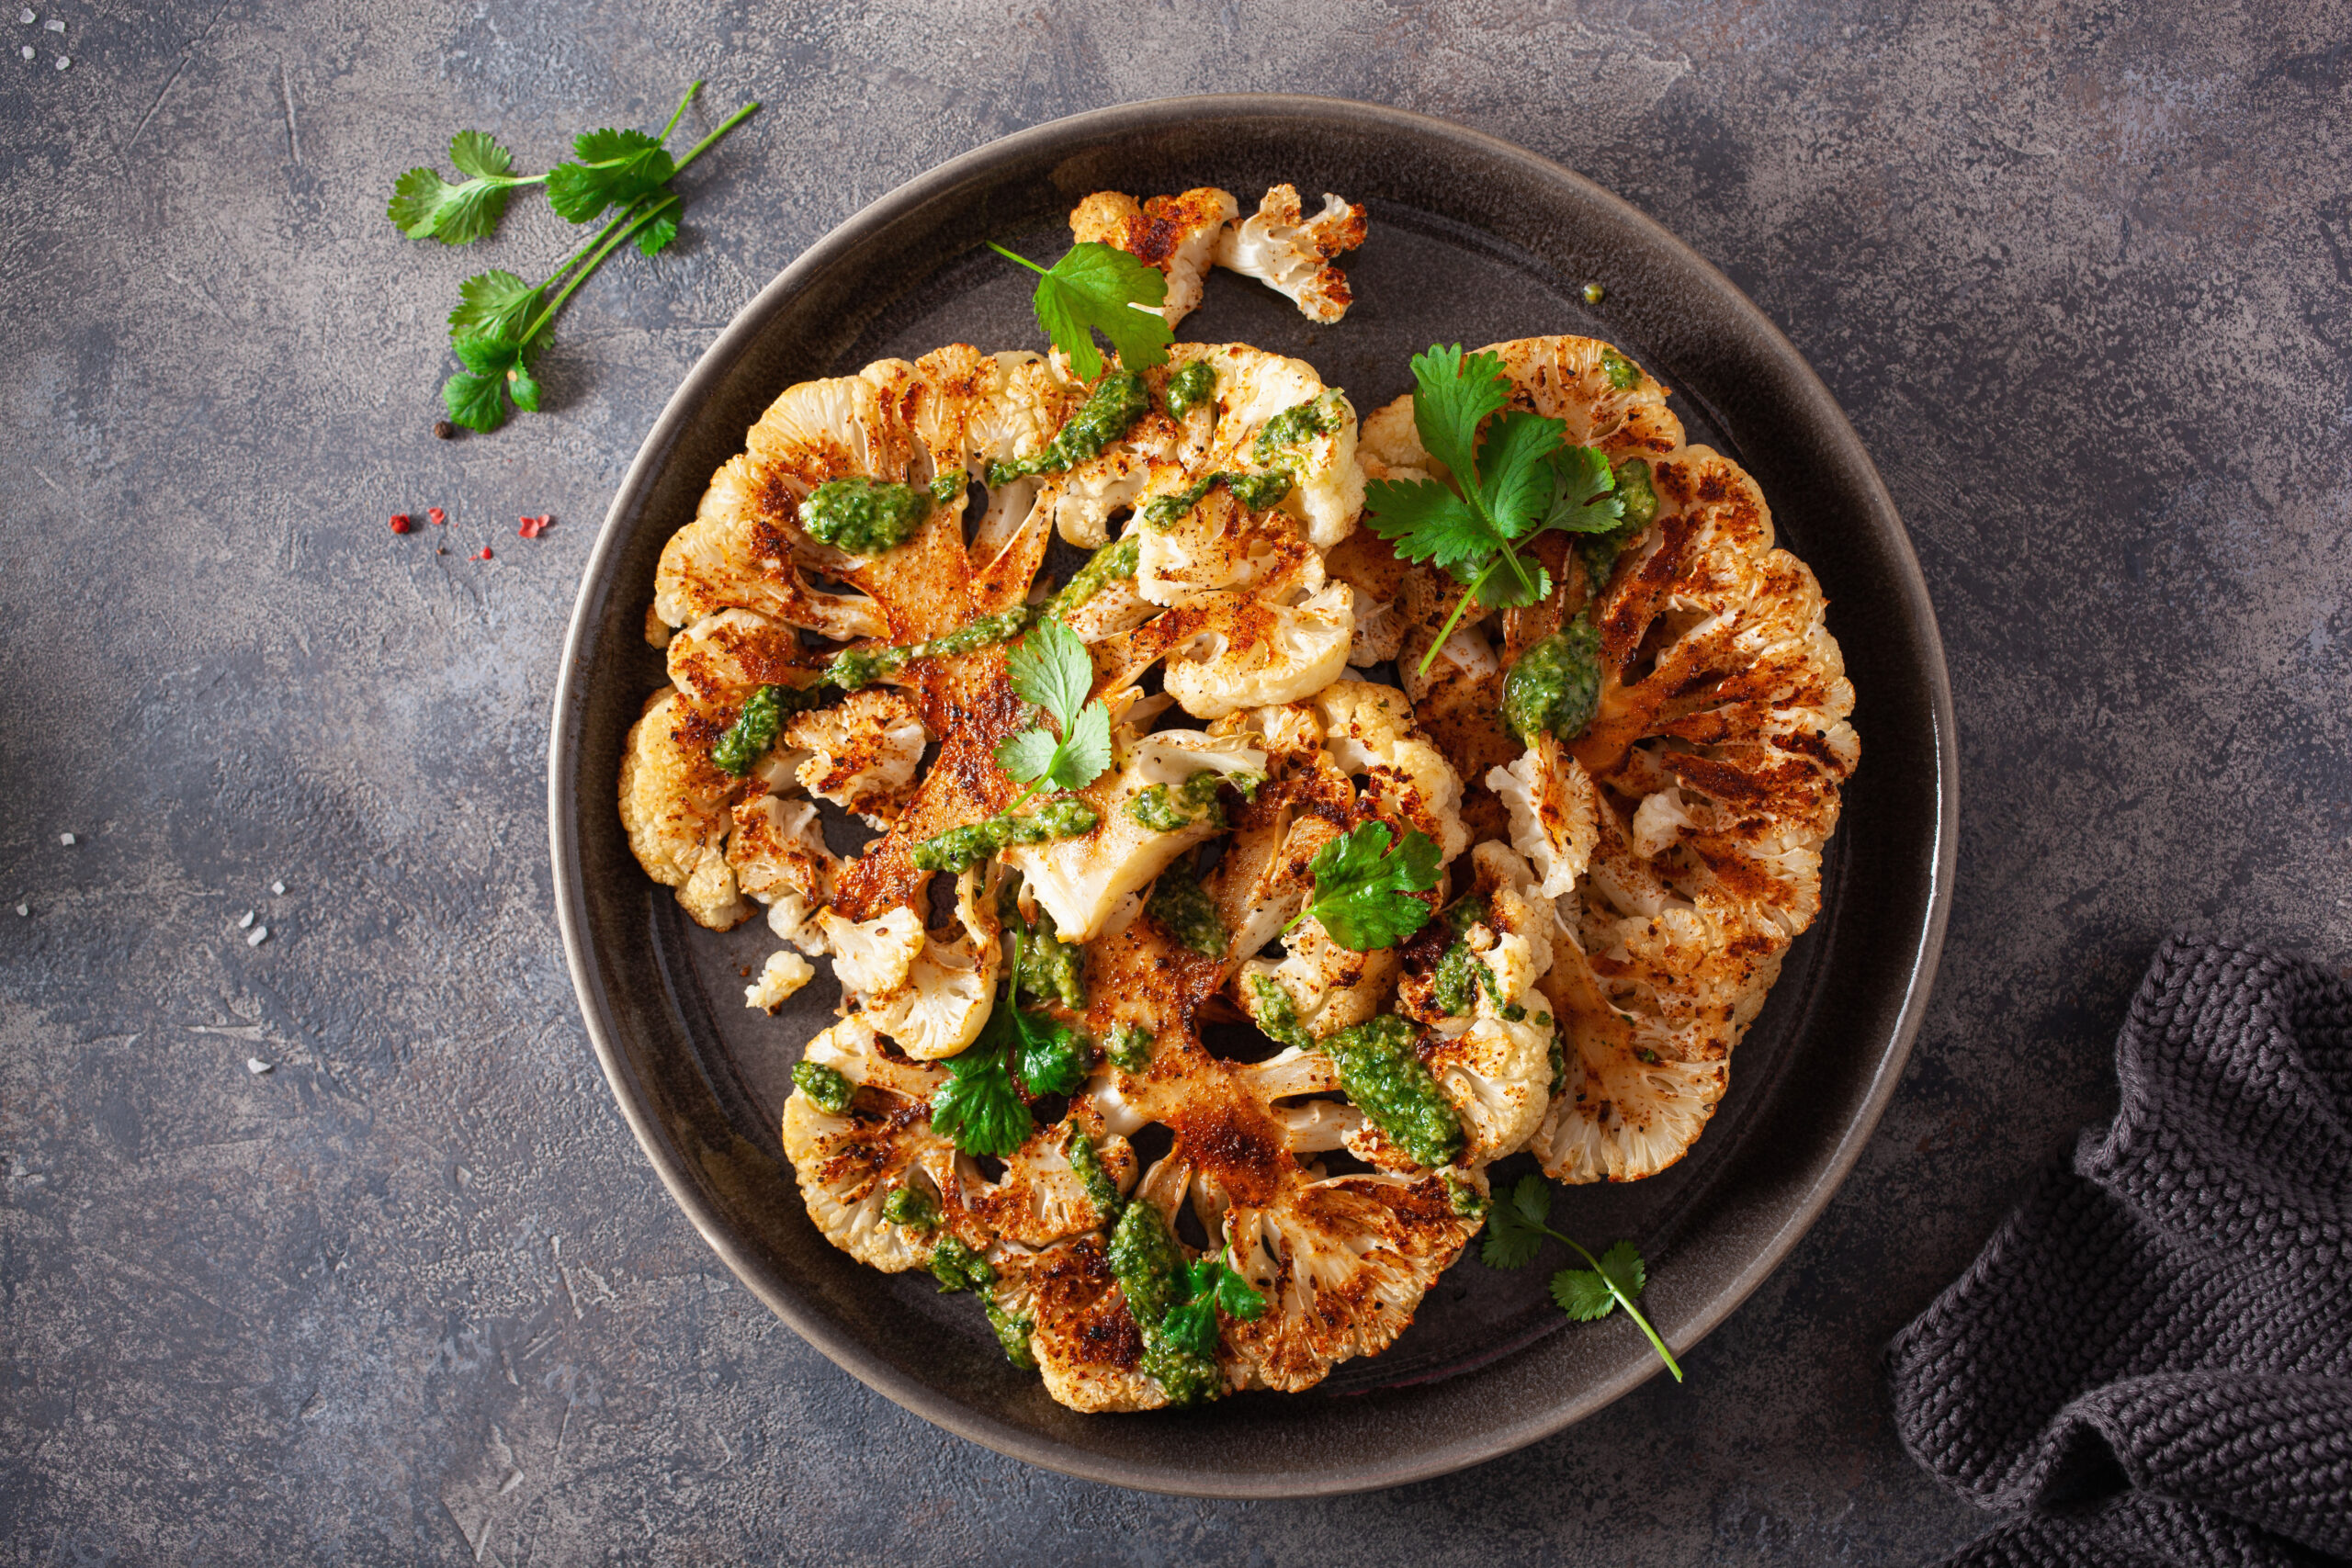 cauliflower steaks with herb sauce and spice. plant based meat substitute